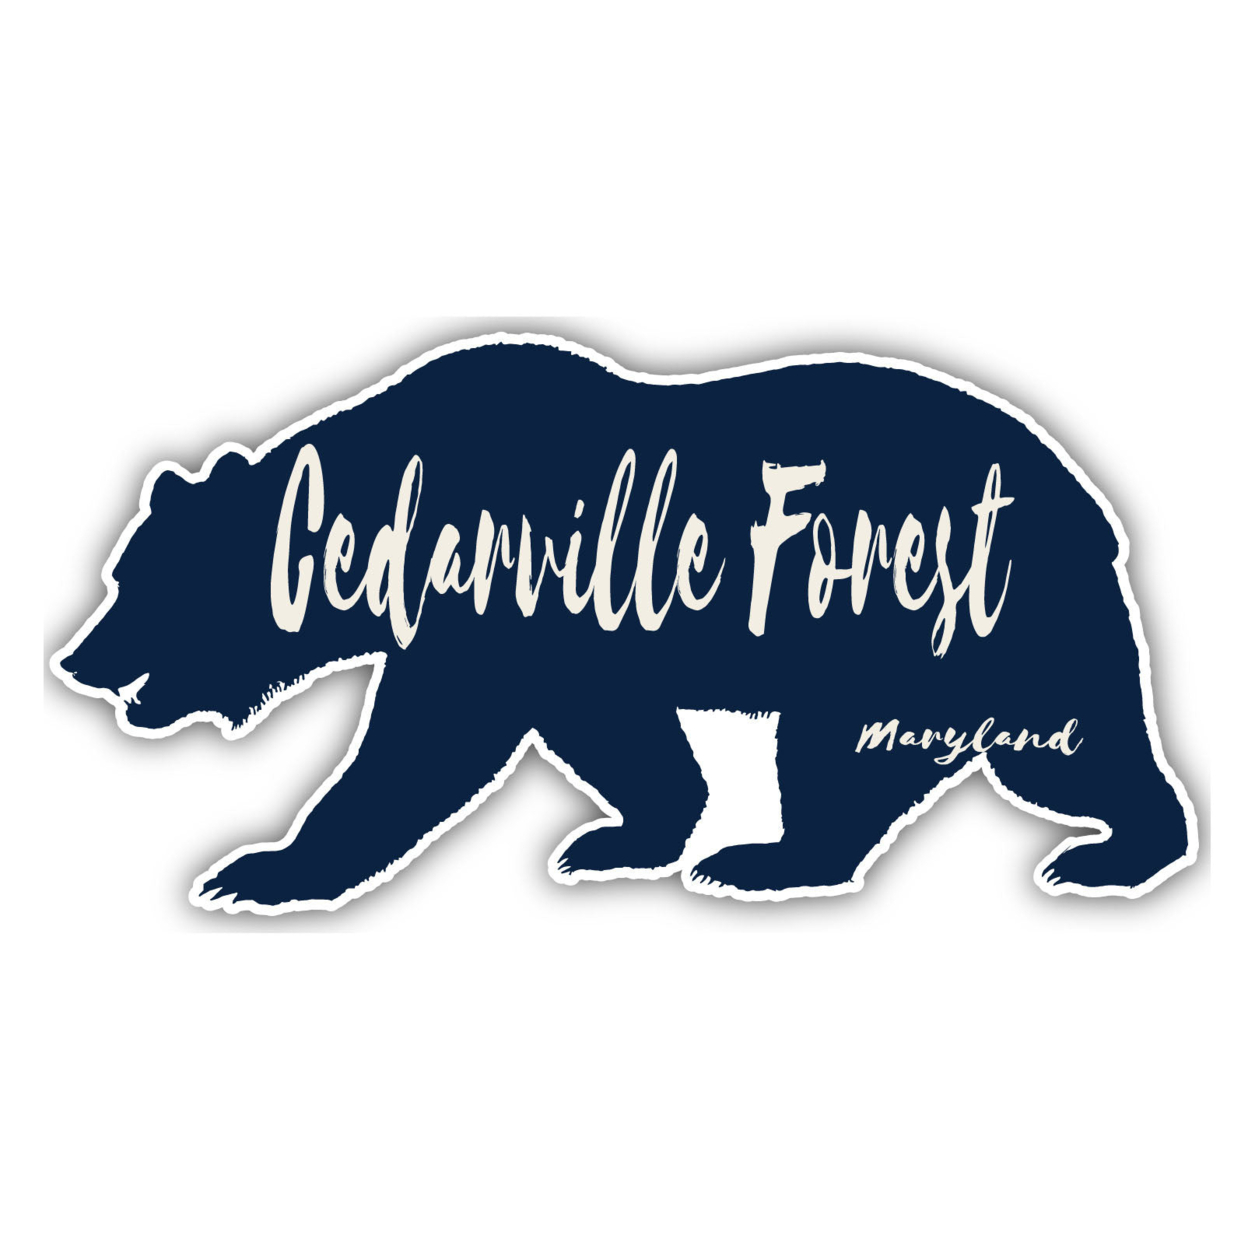 Cedarville Forest Maryland Souvenir Decorative Stickers (Choose Theme And Size) - Single Unit, 4-Inch, Bear